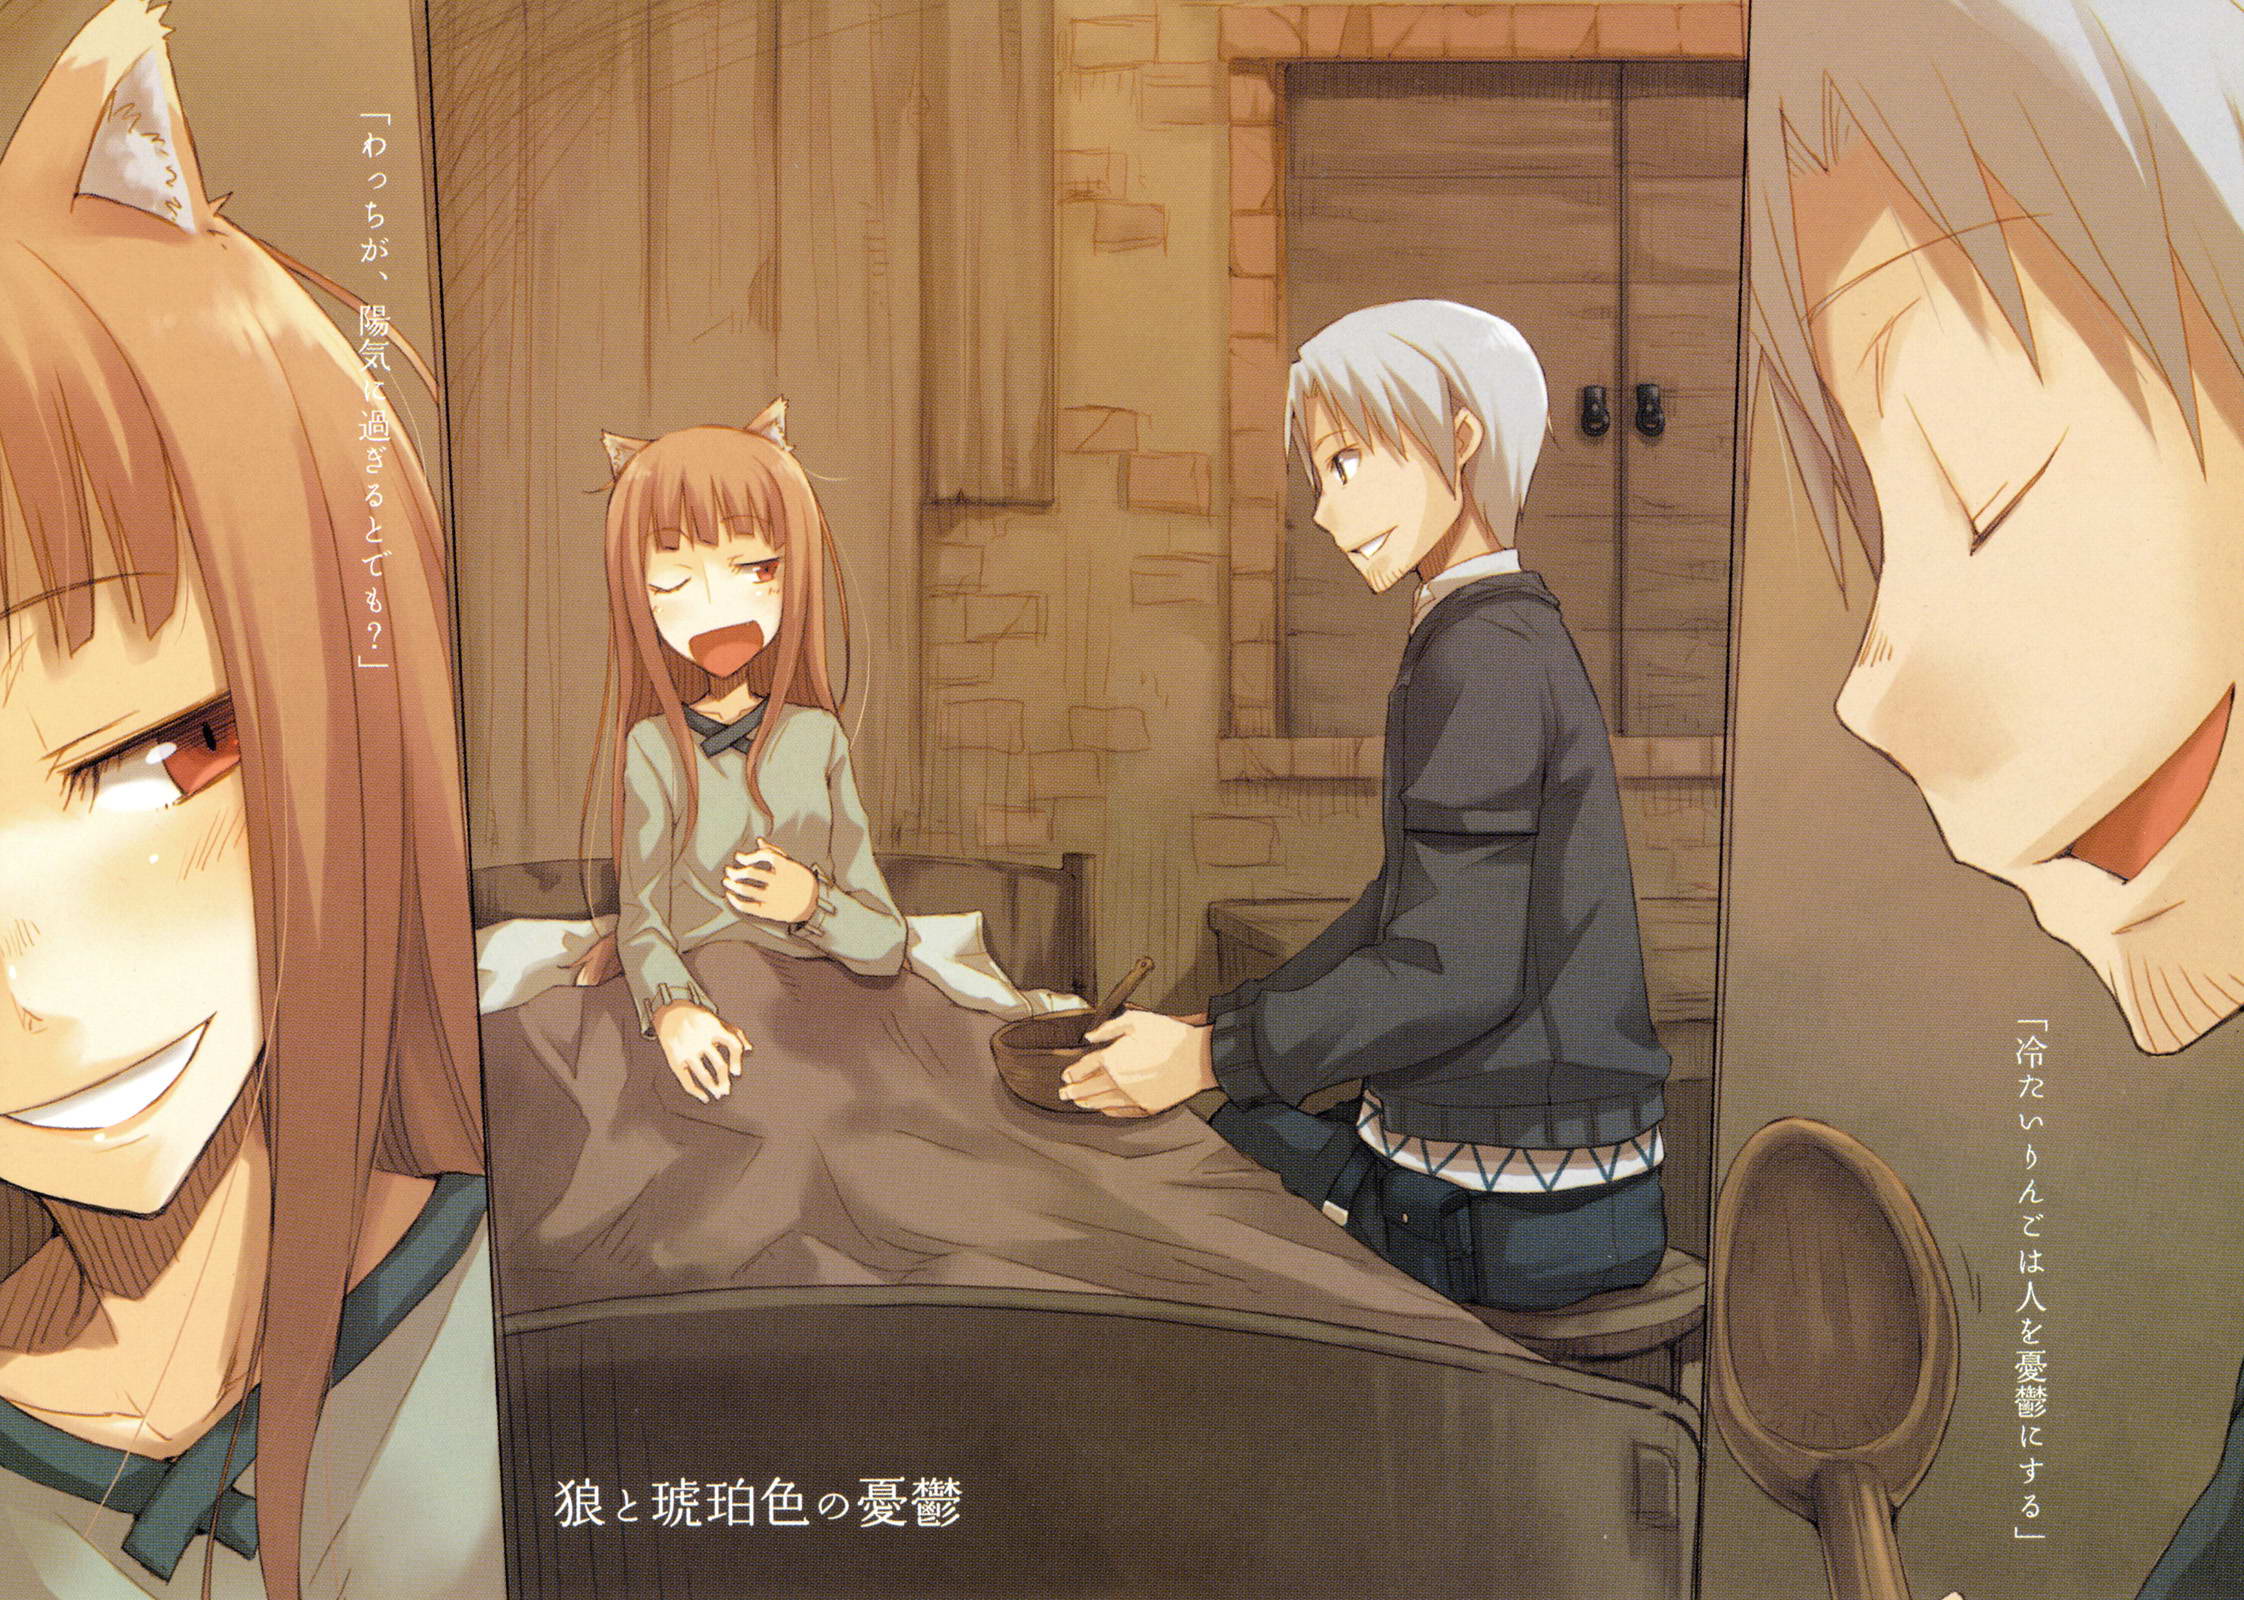 Kraft Lawrence and Holo from Spice and Wolf in a captivating anime artwork.